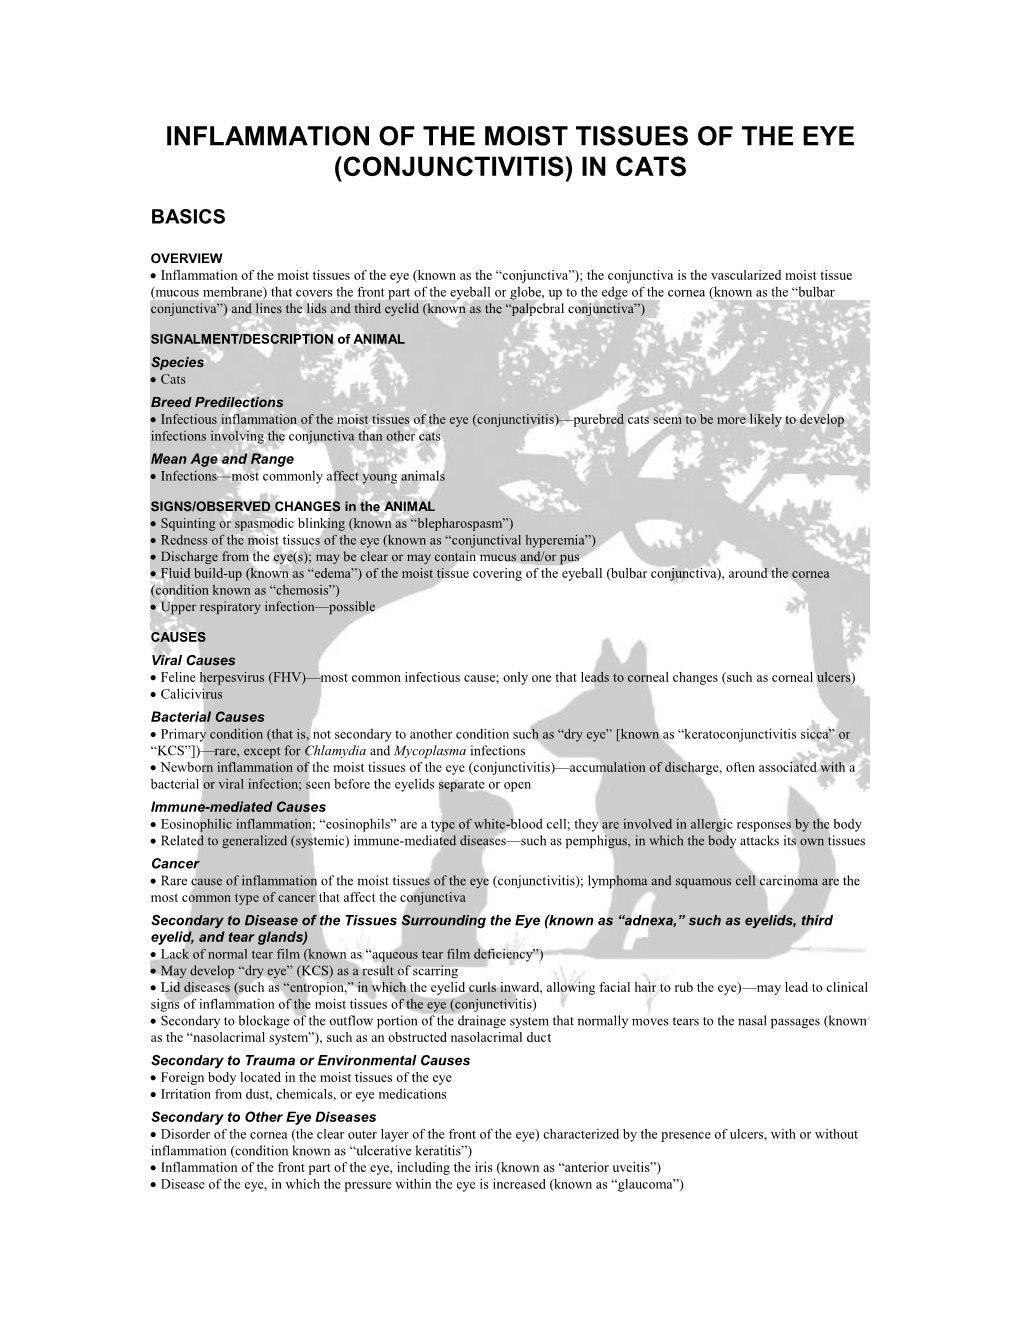 Inflammation of the Moist Tissue of the Eye (CONJUNCTIVITIS)In Cats.Pdf